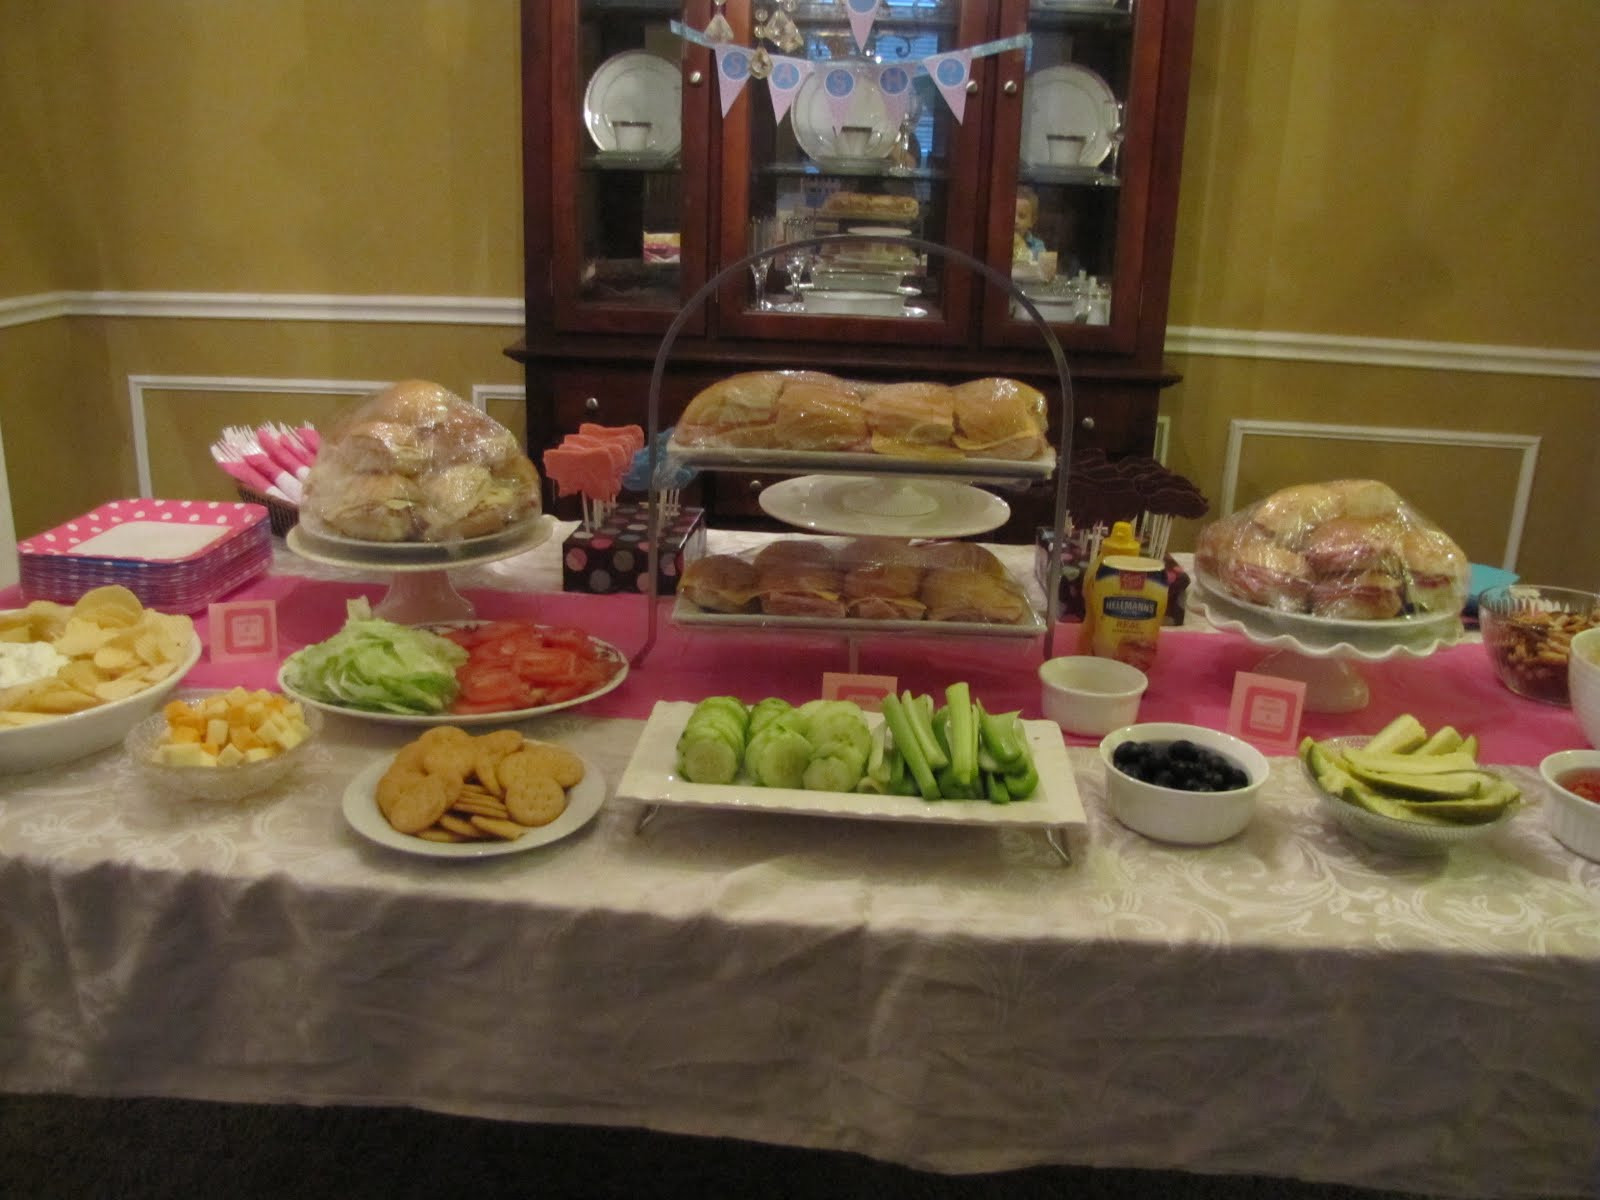 Baby Gender Party Food Ideas
 lil Mop Top Stache or Sash Gender Reveal Party